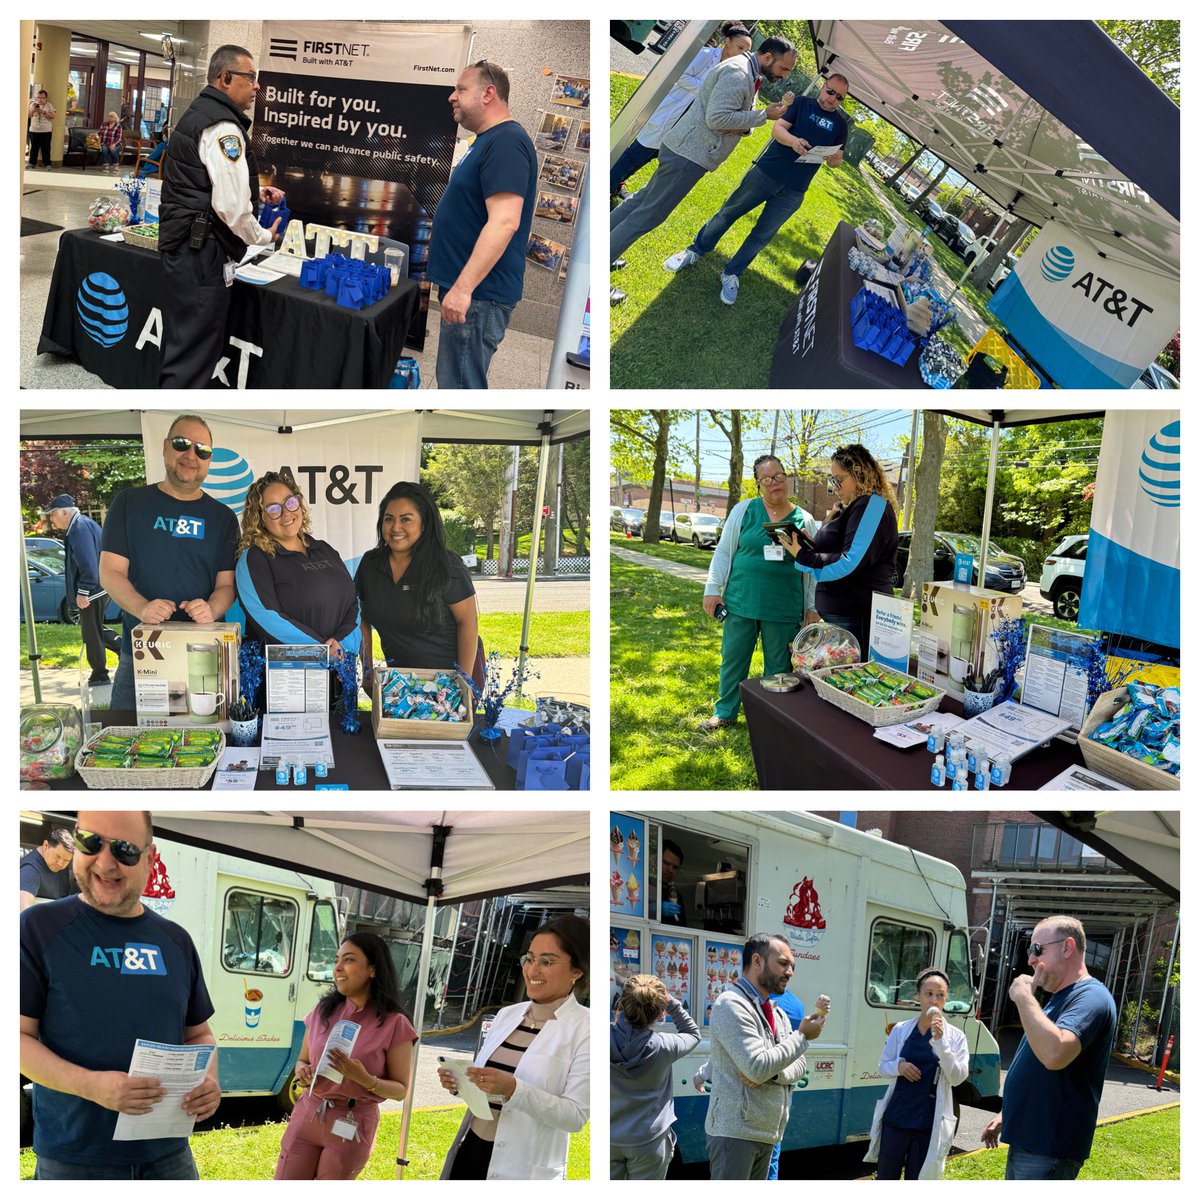 What an amazing event today! @ATT thanking our #Healthcareheros @RUMCSI it was a thrill and thank you to everyone involved making today possible and sharing everything @FirstNet with our first responders! #lifeatATT #NYNJstateofmind @angels_candie @keroninc @KirkBailey17